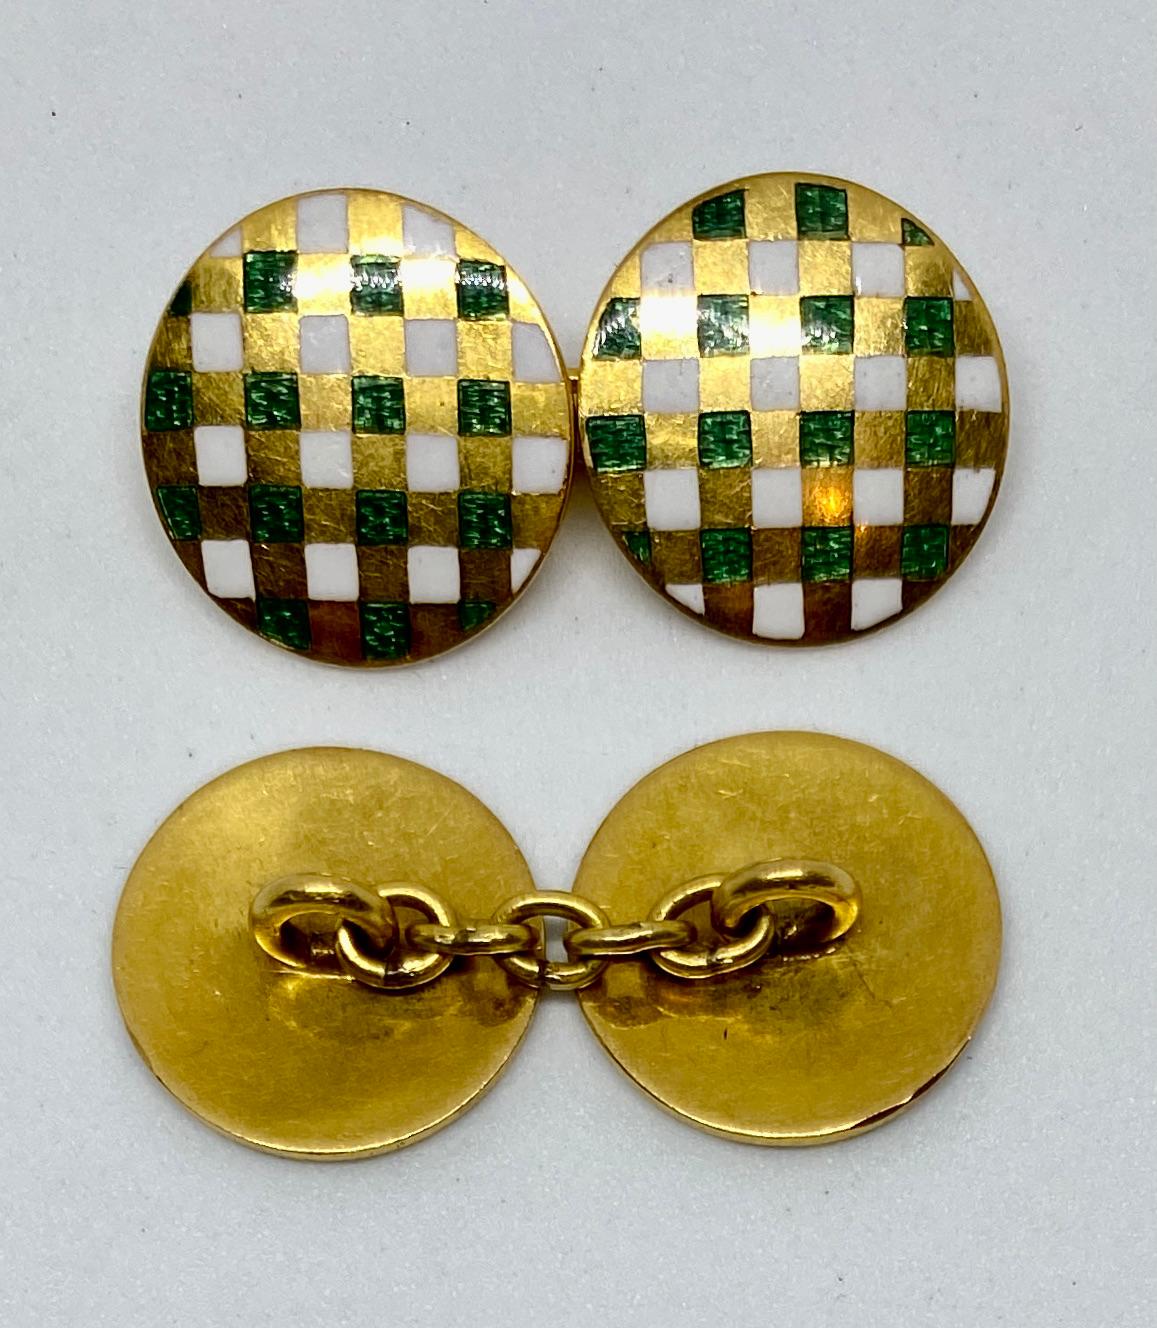 Beautiful, double-sided cufflinks in solid 18K yellow gold featuring opaque white and translucent green enameling in a checkered pattern. 

Each of the four faces measures 14.5mm in diameter and is connected to its mate by a yellow gold chain.